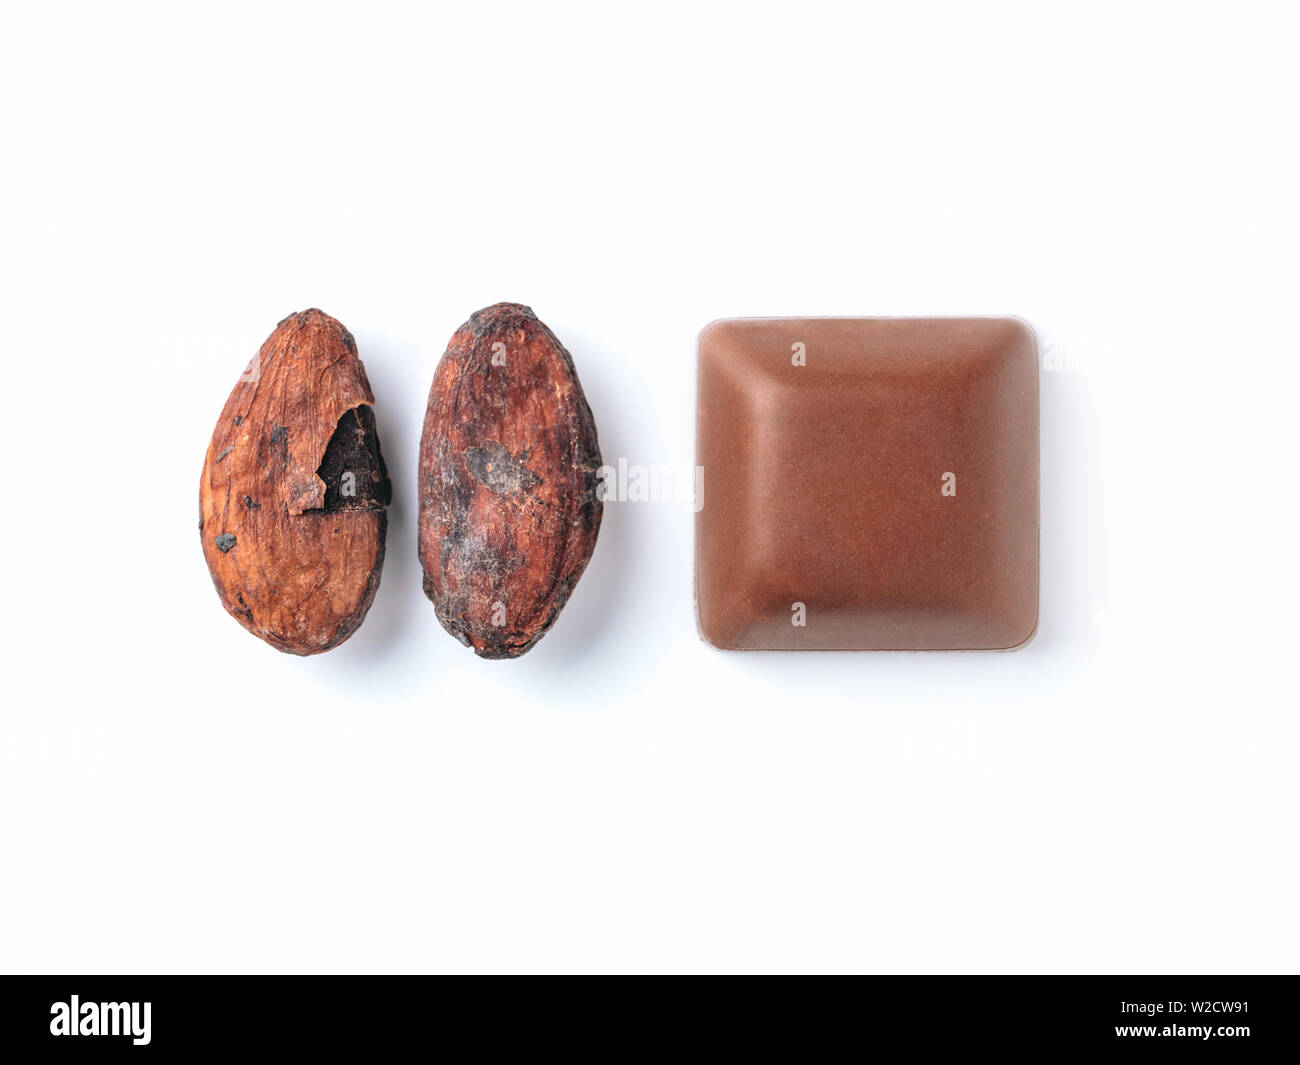 Raw cacao bean and chocolate piece on white background. Isolated on white with clipping path. Copy space for text. Stock Photo